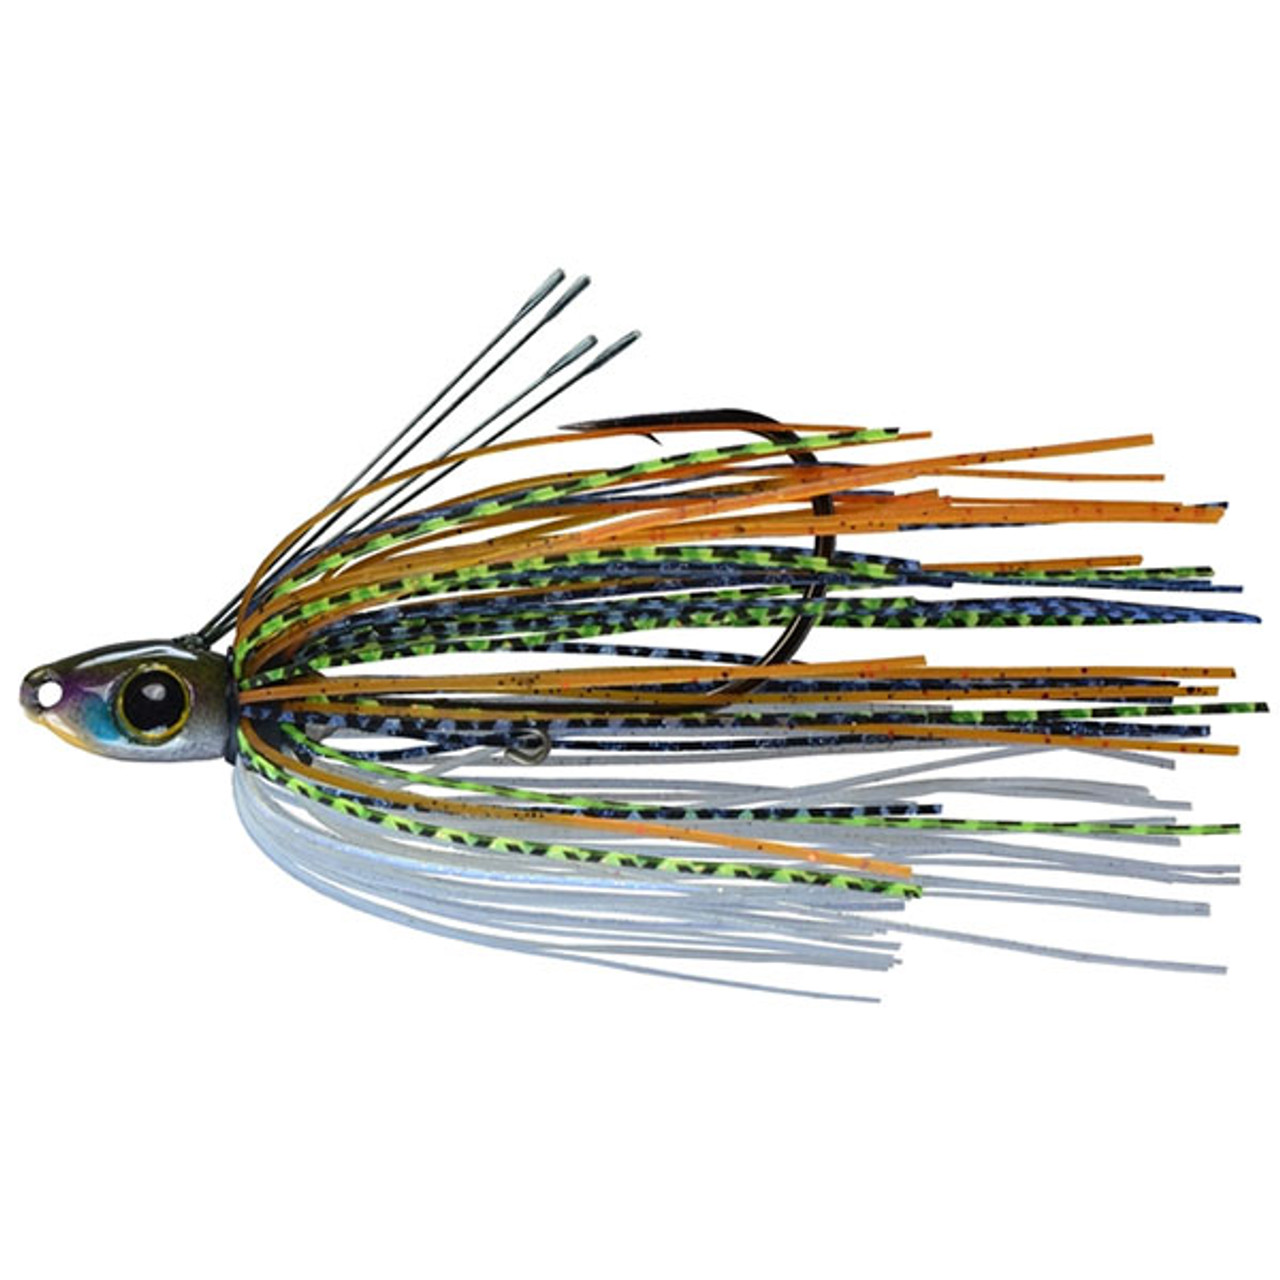 Straight Shooter Pro 3/4 oz Swim Jig by Picasso Lures